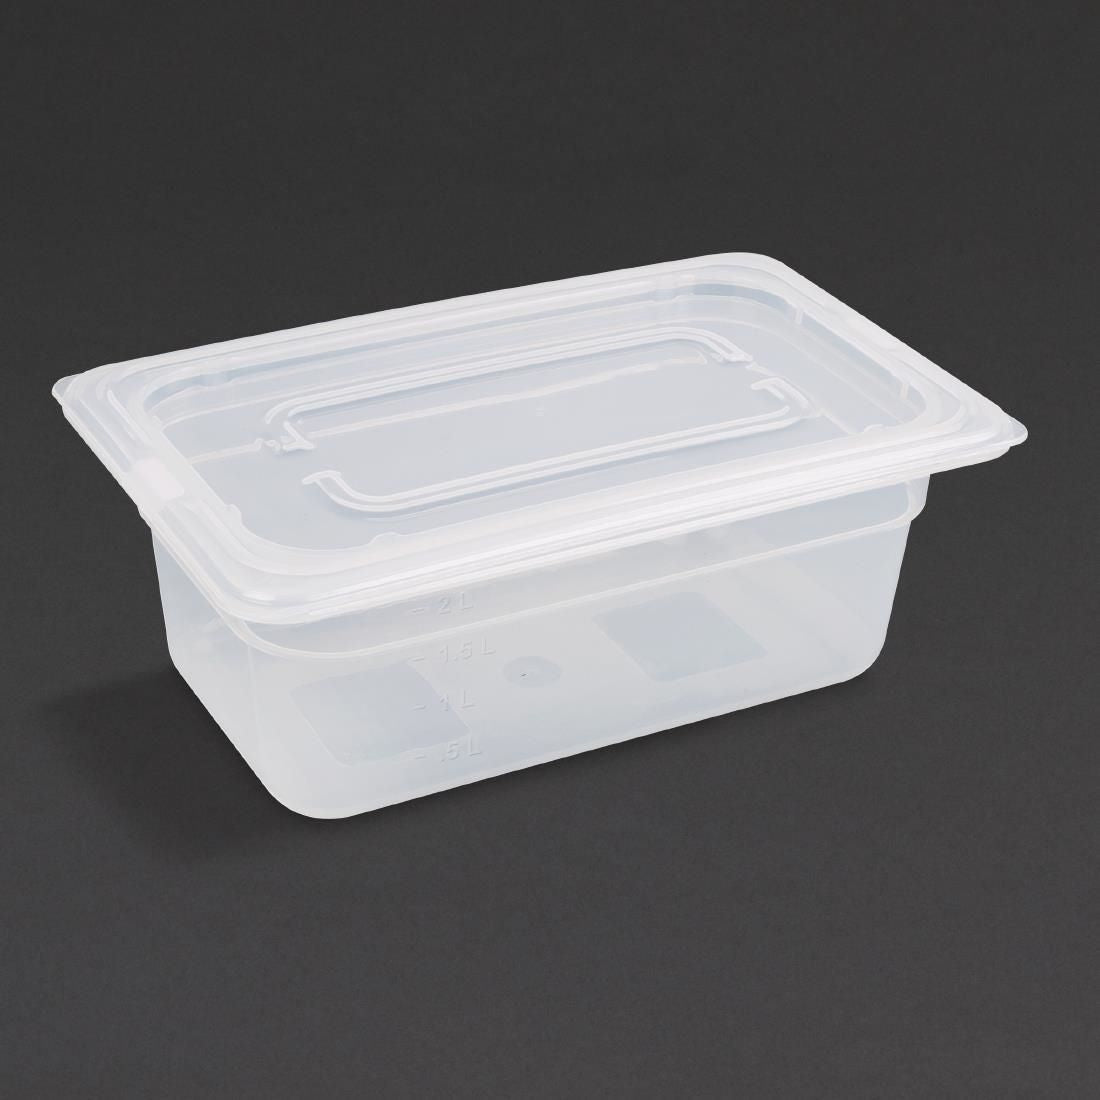 GJ523 Vogue Polypropylene 1/4 Gastronorm Container with Lid 100mm (Pack of 4) JD Catering Equipment Solutions Ltd